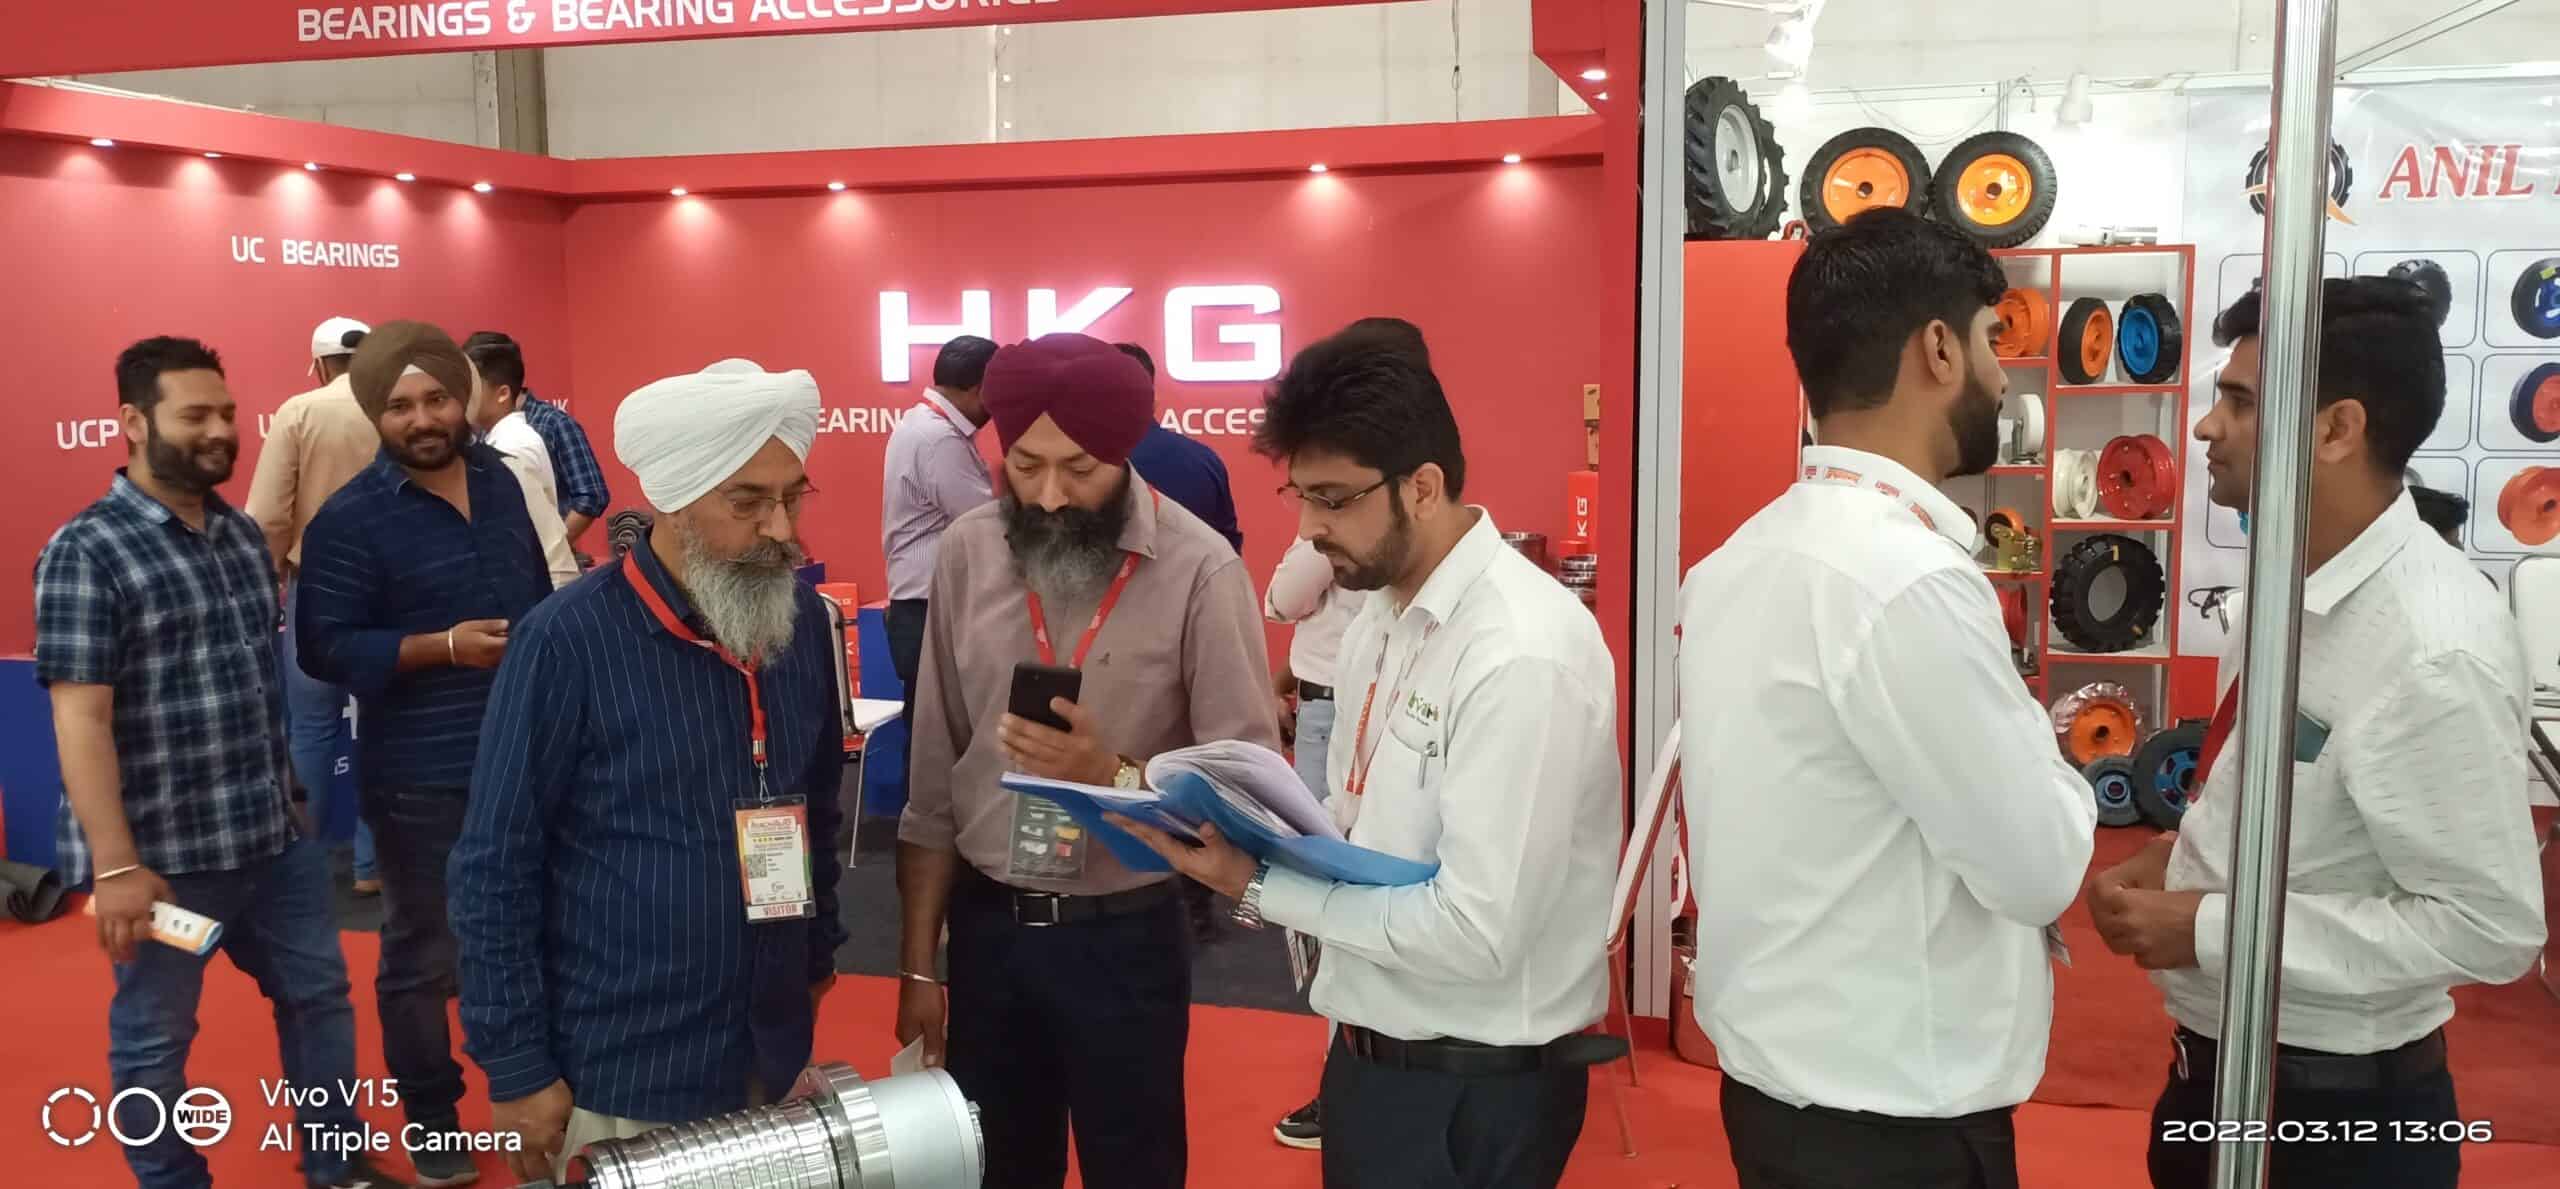 MachAuto-Expo 2022-11th to 14th March. 2022 at Ludhaina Exhibition Centre, G.T. Road, Sahnewal, Ludhiana, Punjab